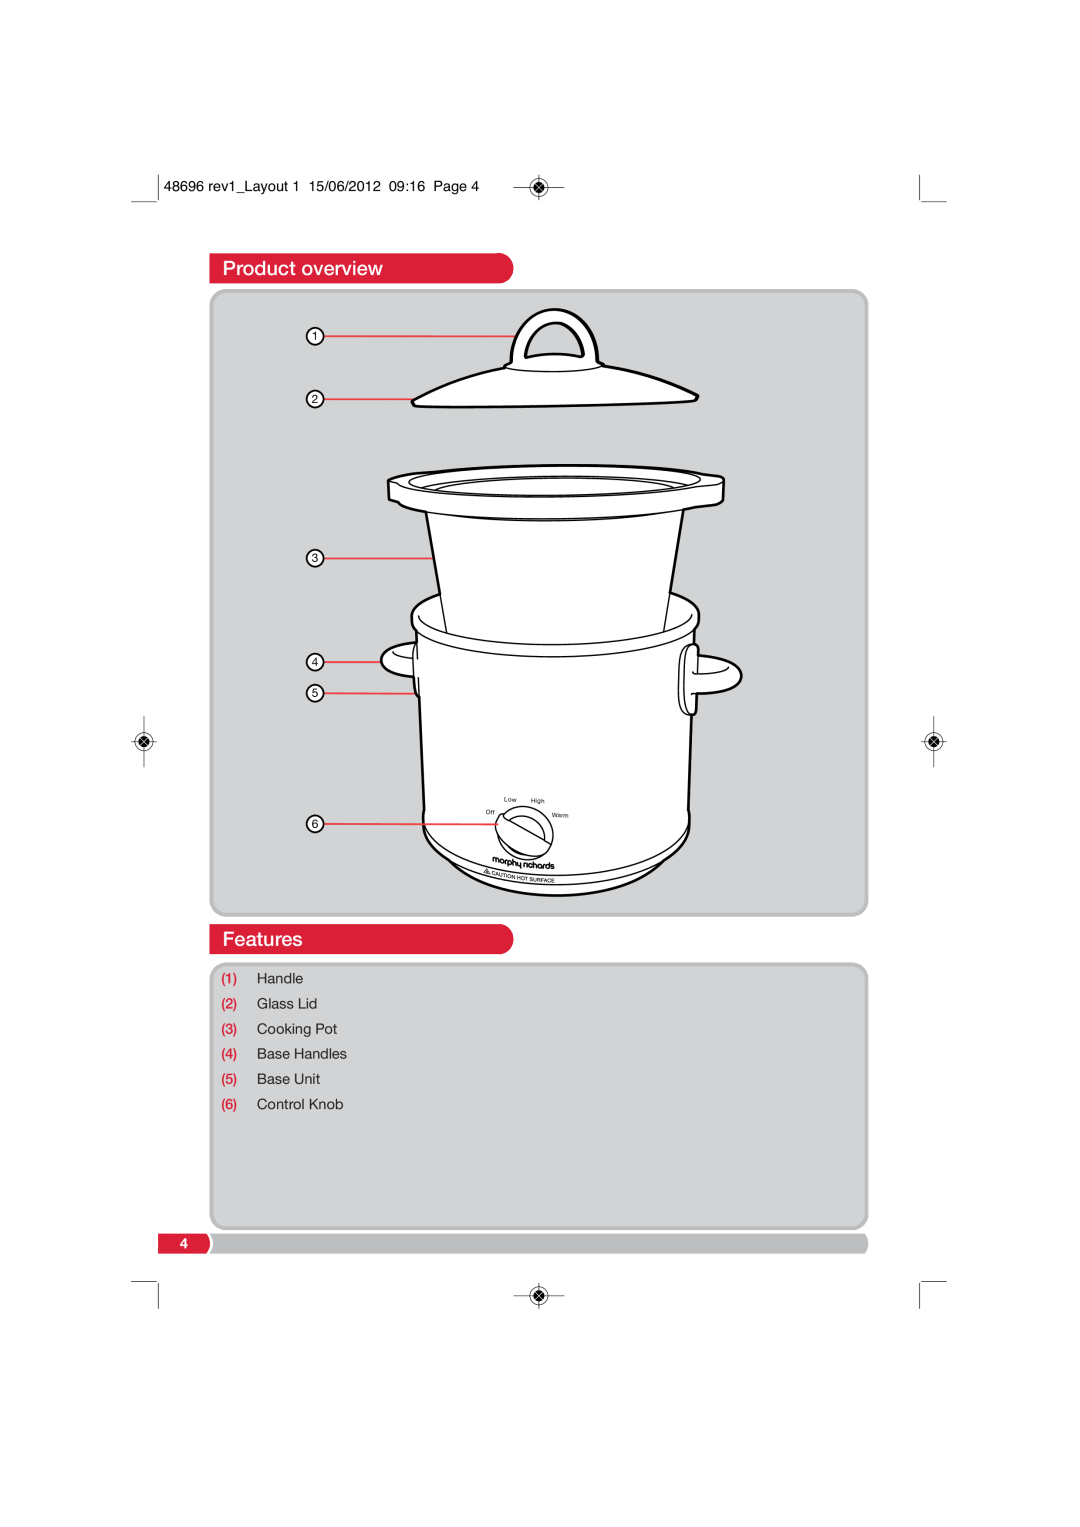 Morphy Richards SC48696 manual Product overview, Features, 48696 rev1 Layout 1 15/06/2012 09 16 Page, High, Warm 